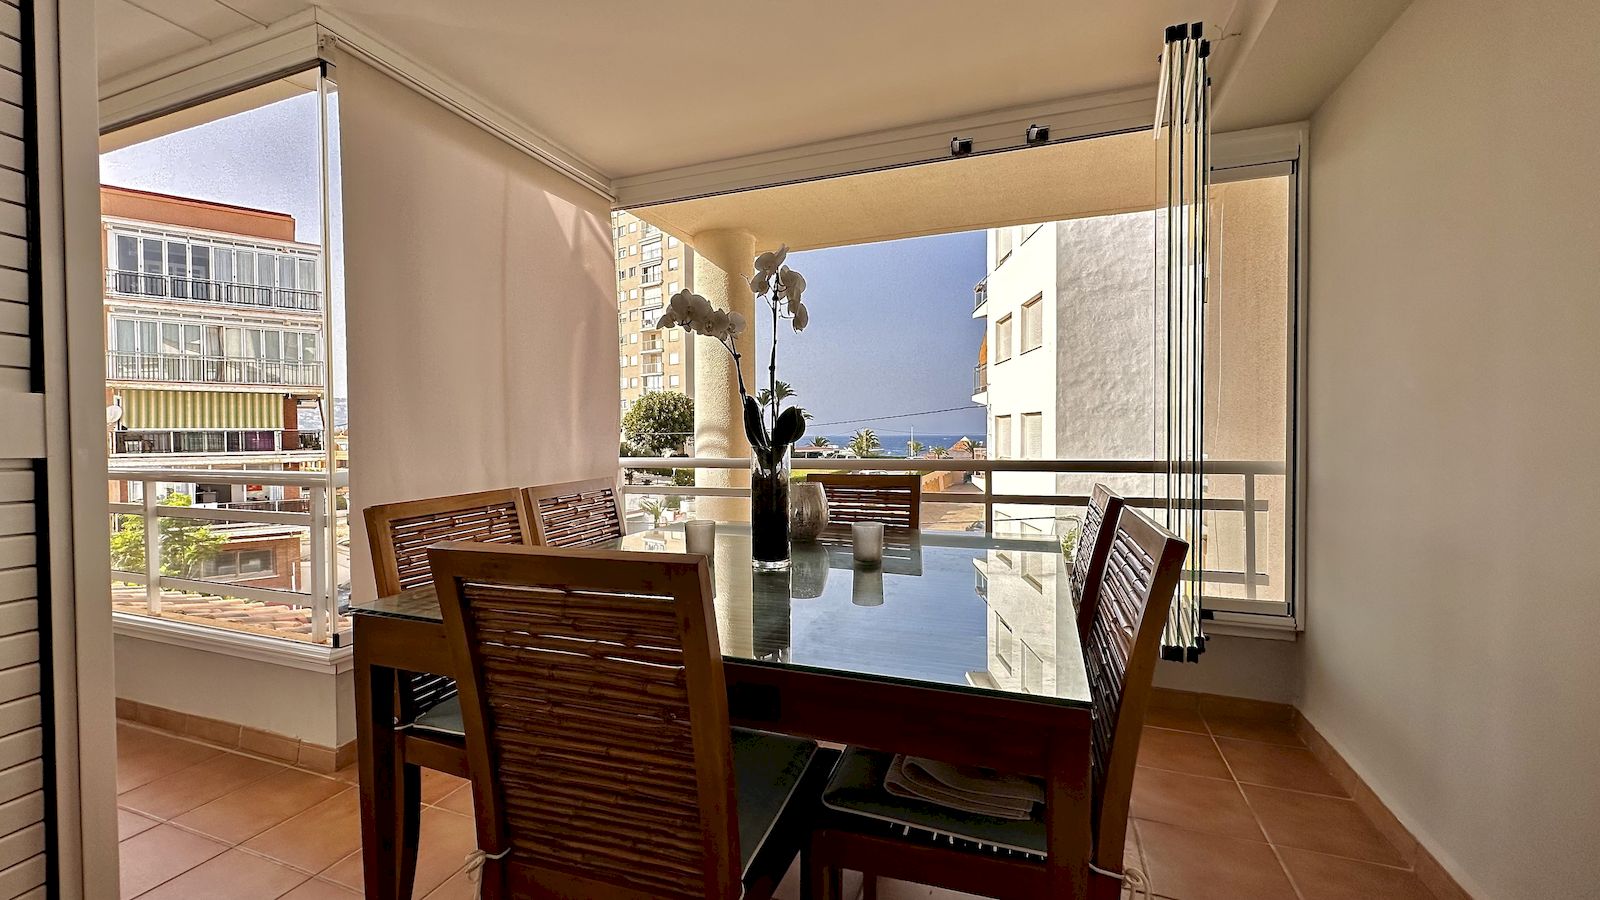 Duplex Penthouse Apartment for Sale with partial sea view on the Playa del Arenal - Javea